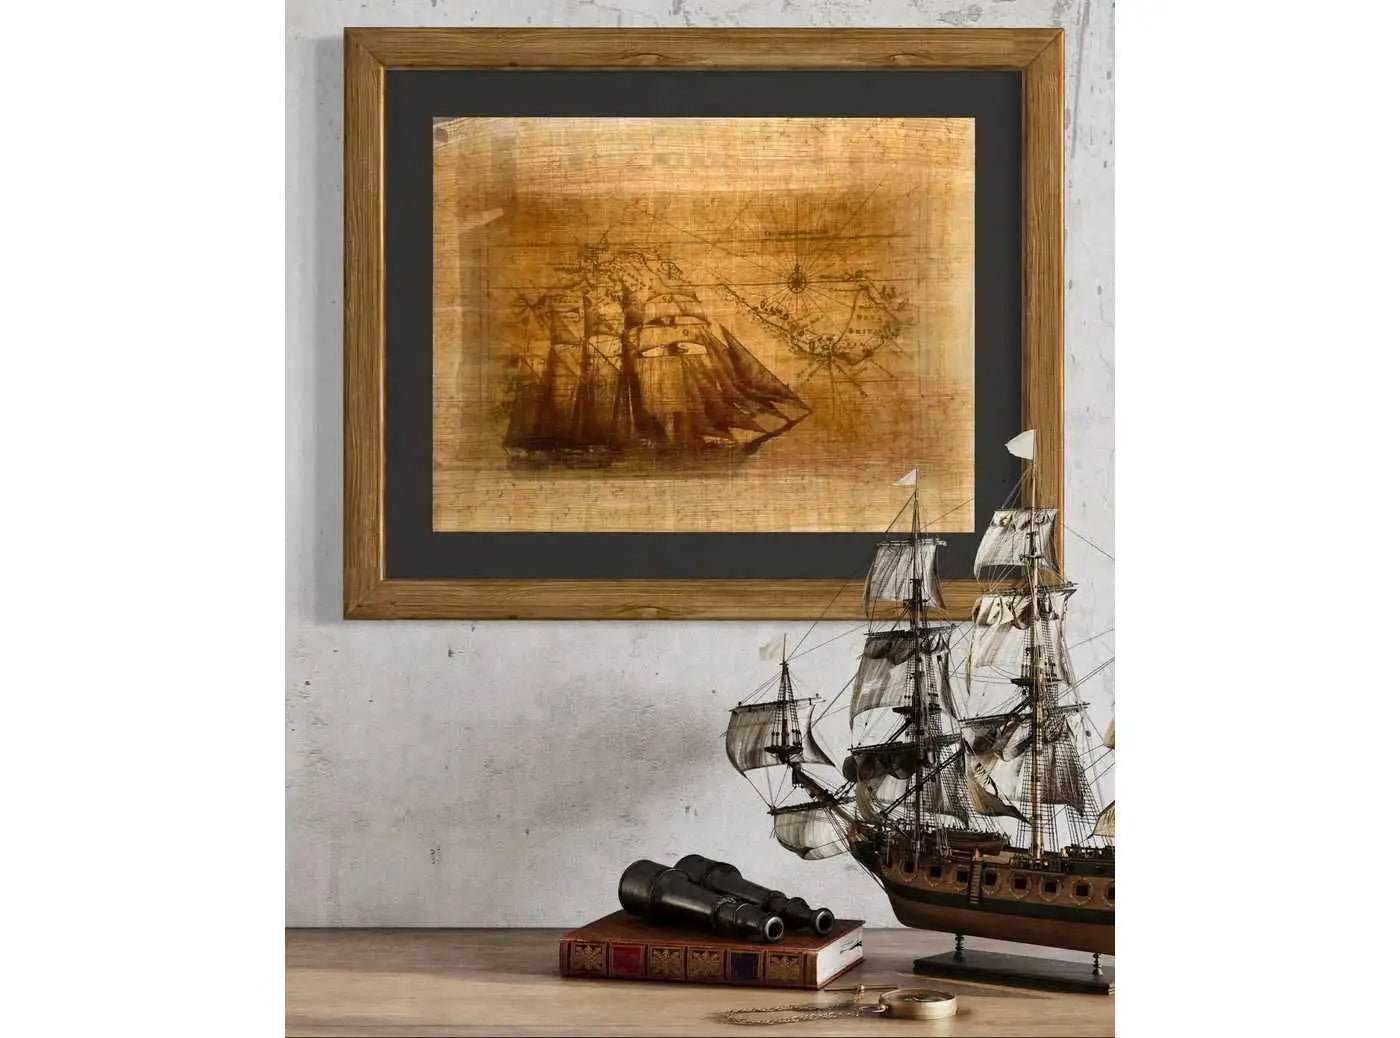 Nautical Pirate Art Decor Ship Map Printing on Egyptian Authentic Papyrus - Pirate Decor Gift - Pirate Art